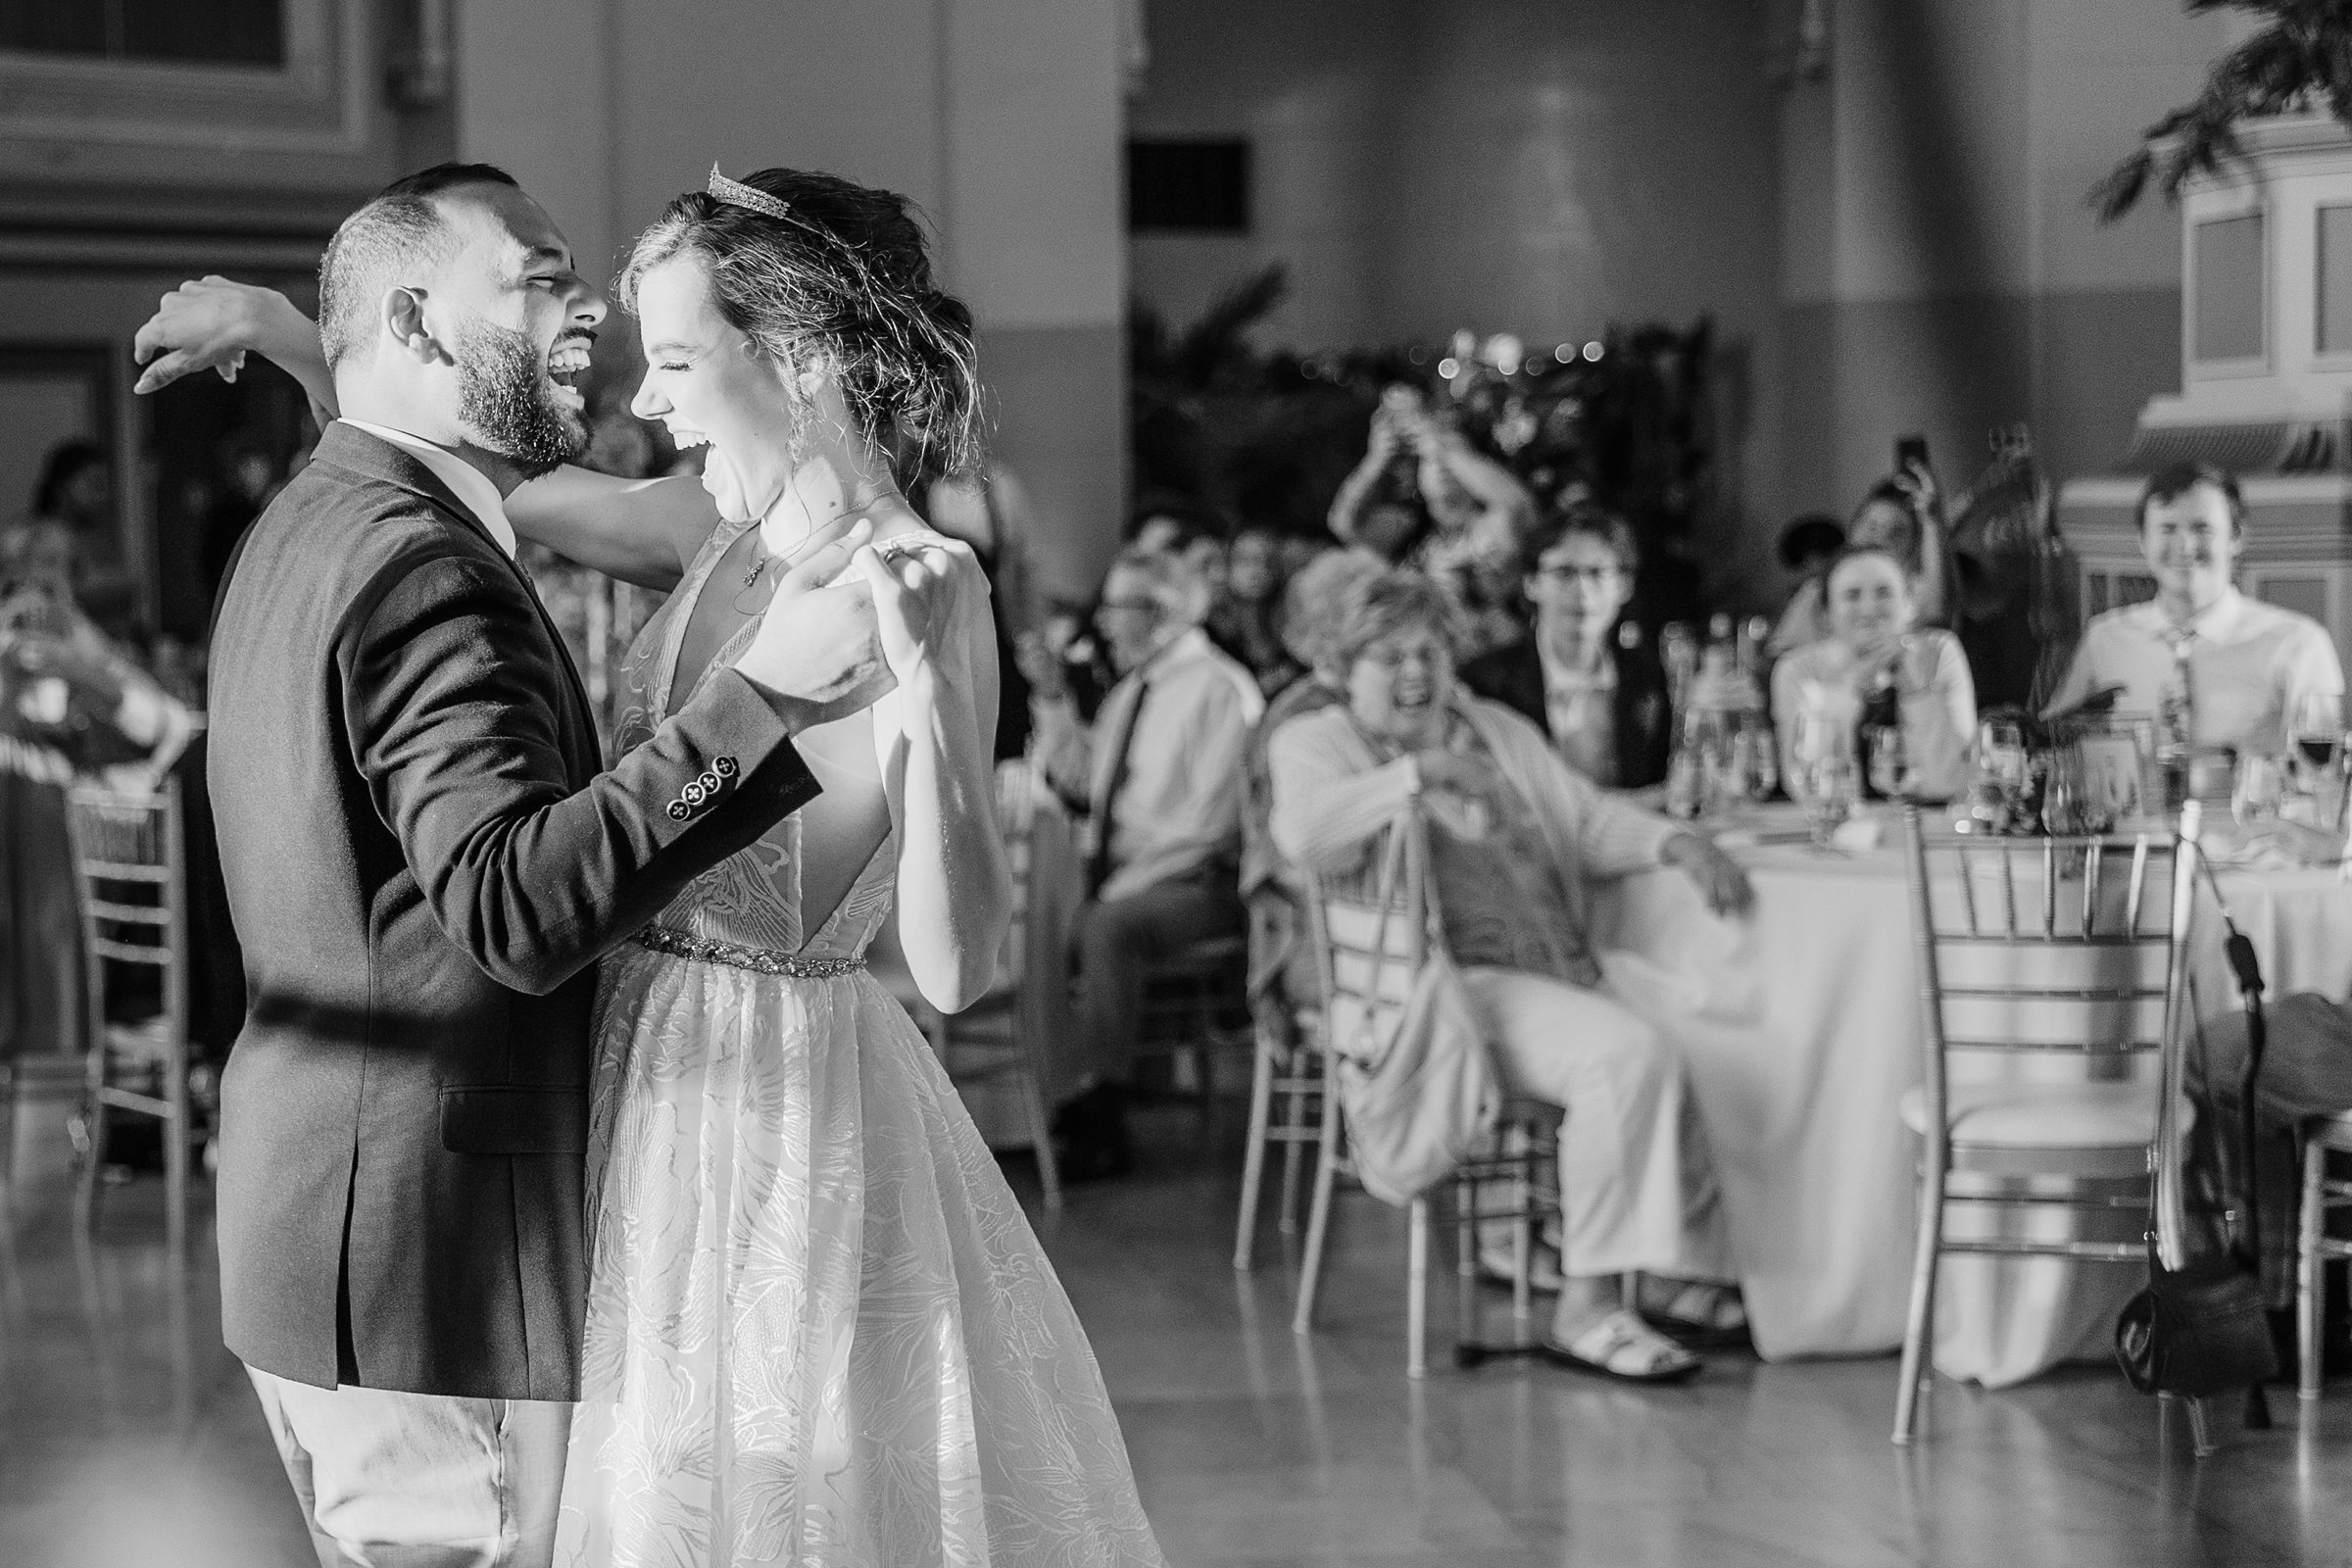 Bride and groom share their first dance. during their wedding at the Union Station in Joliet, Illinois.